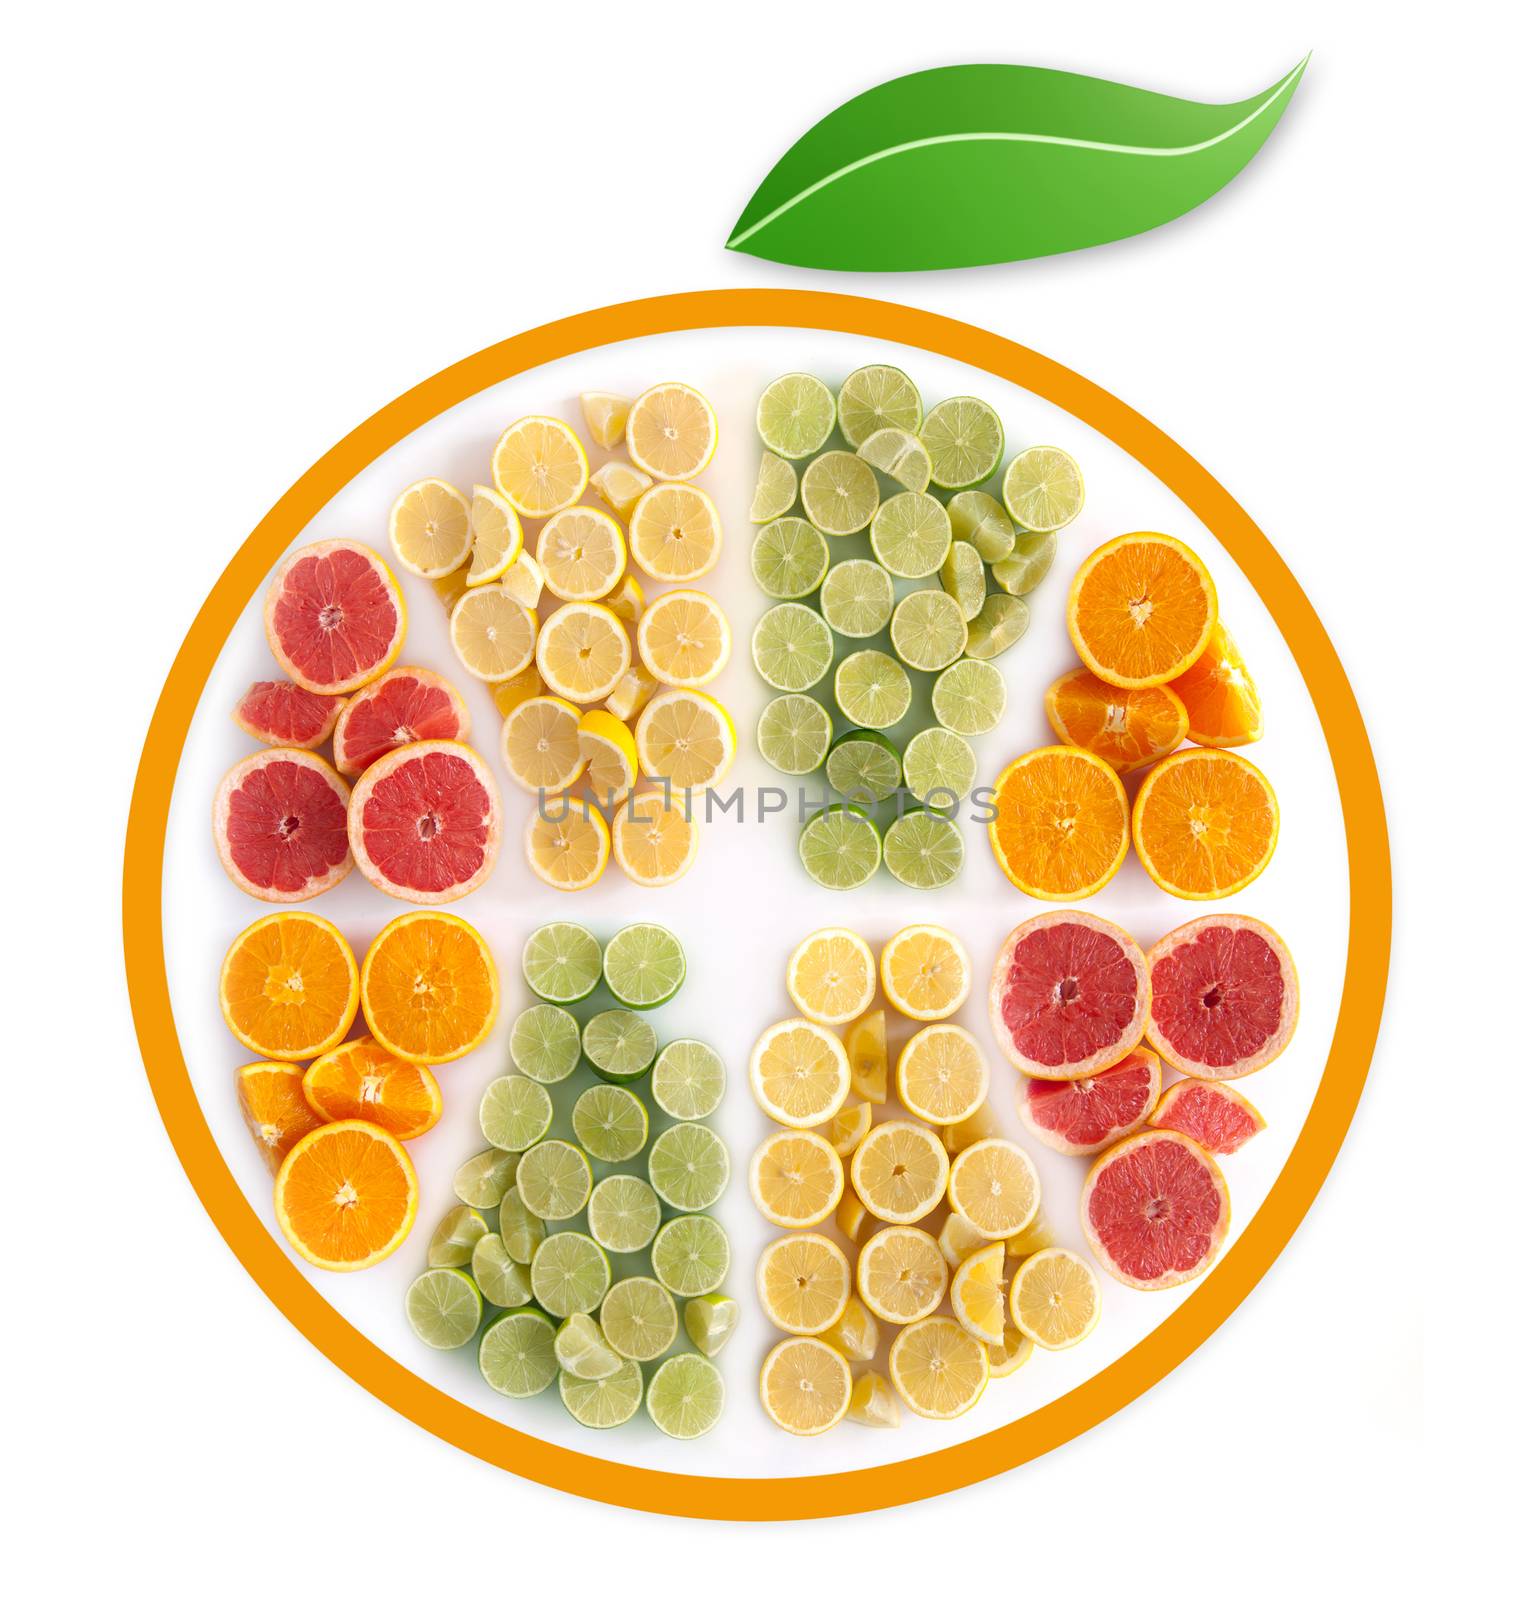 Many fruits in the shape of a sliced citrus including oranges, grapefruits, lemons and limes